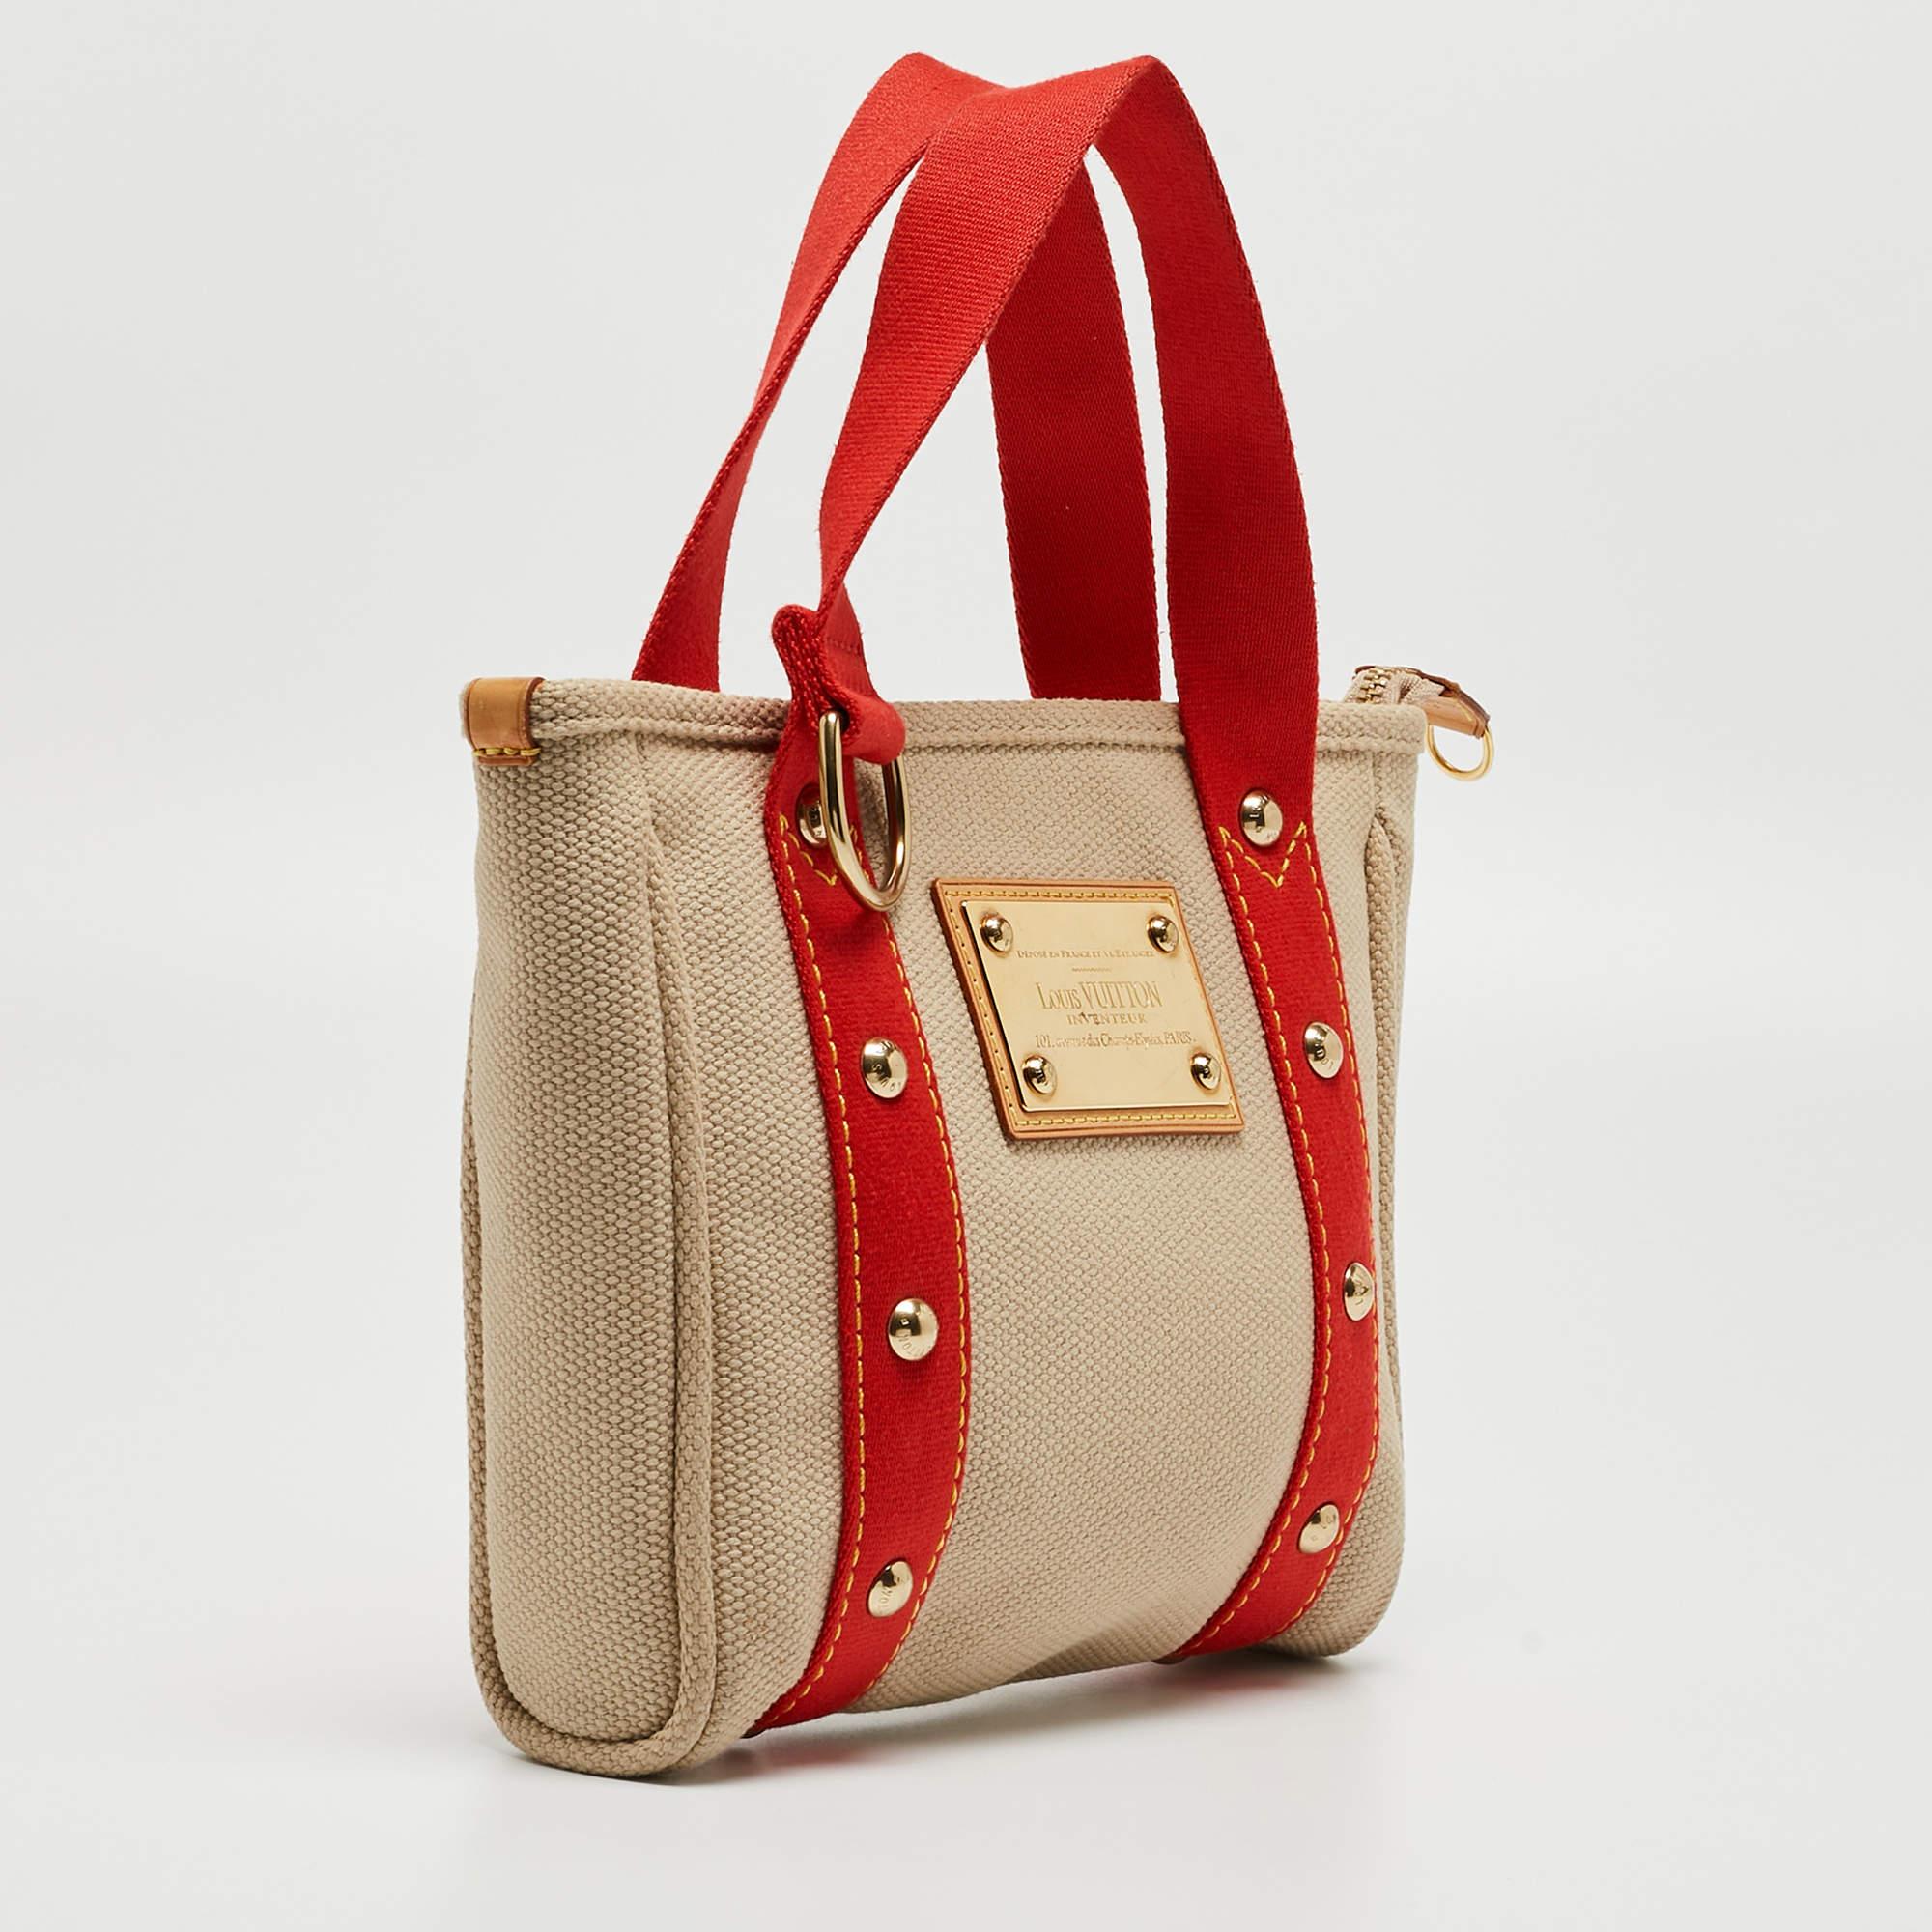 This durable bag by Louis Vuitton is easy to carry and is a blend of style and functionality. Add a touch of glam to your look with this beige and red bag. Crafted with canvas, this fun piece is perfect for the fashionista.

